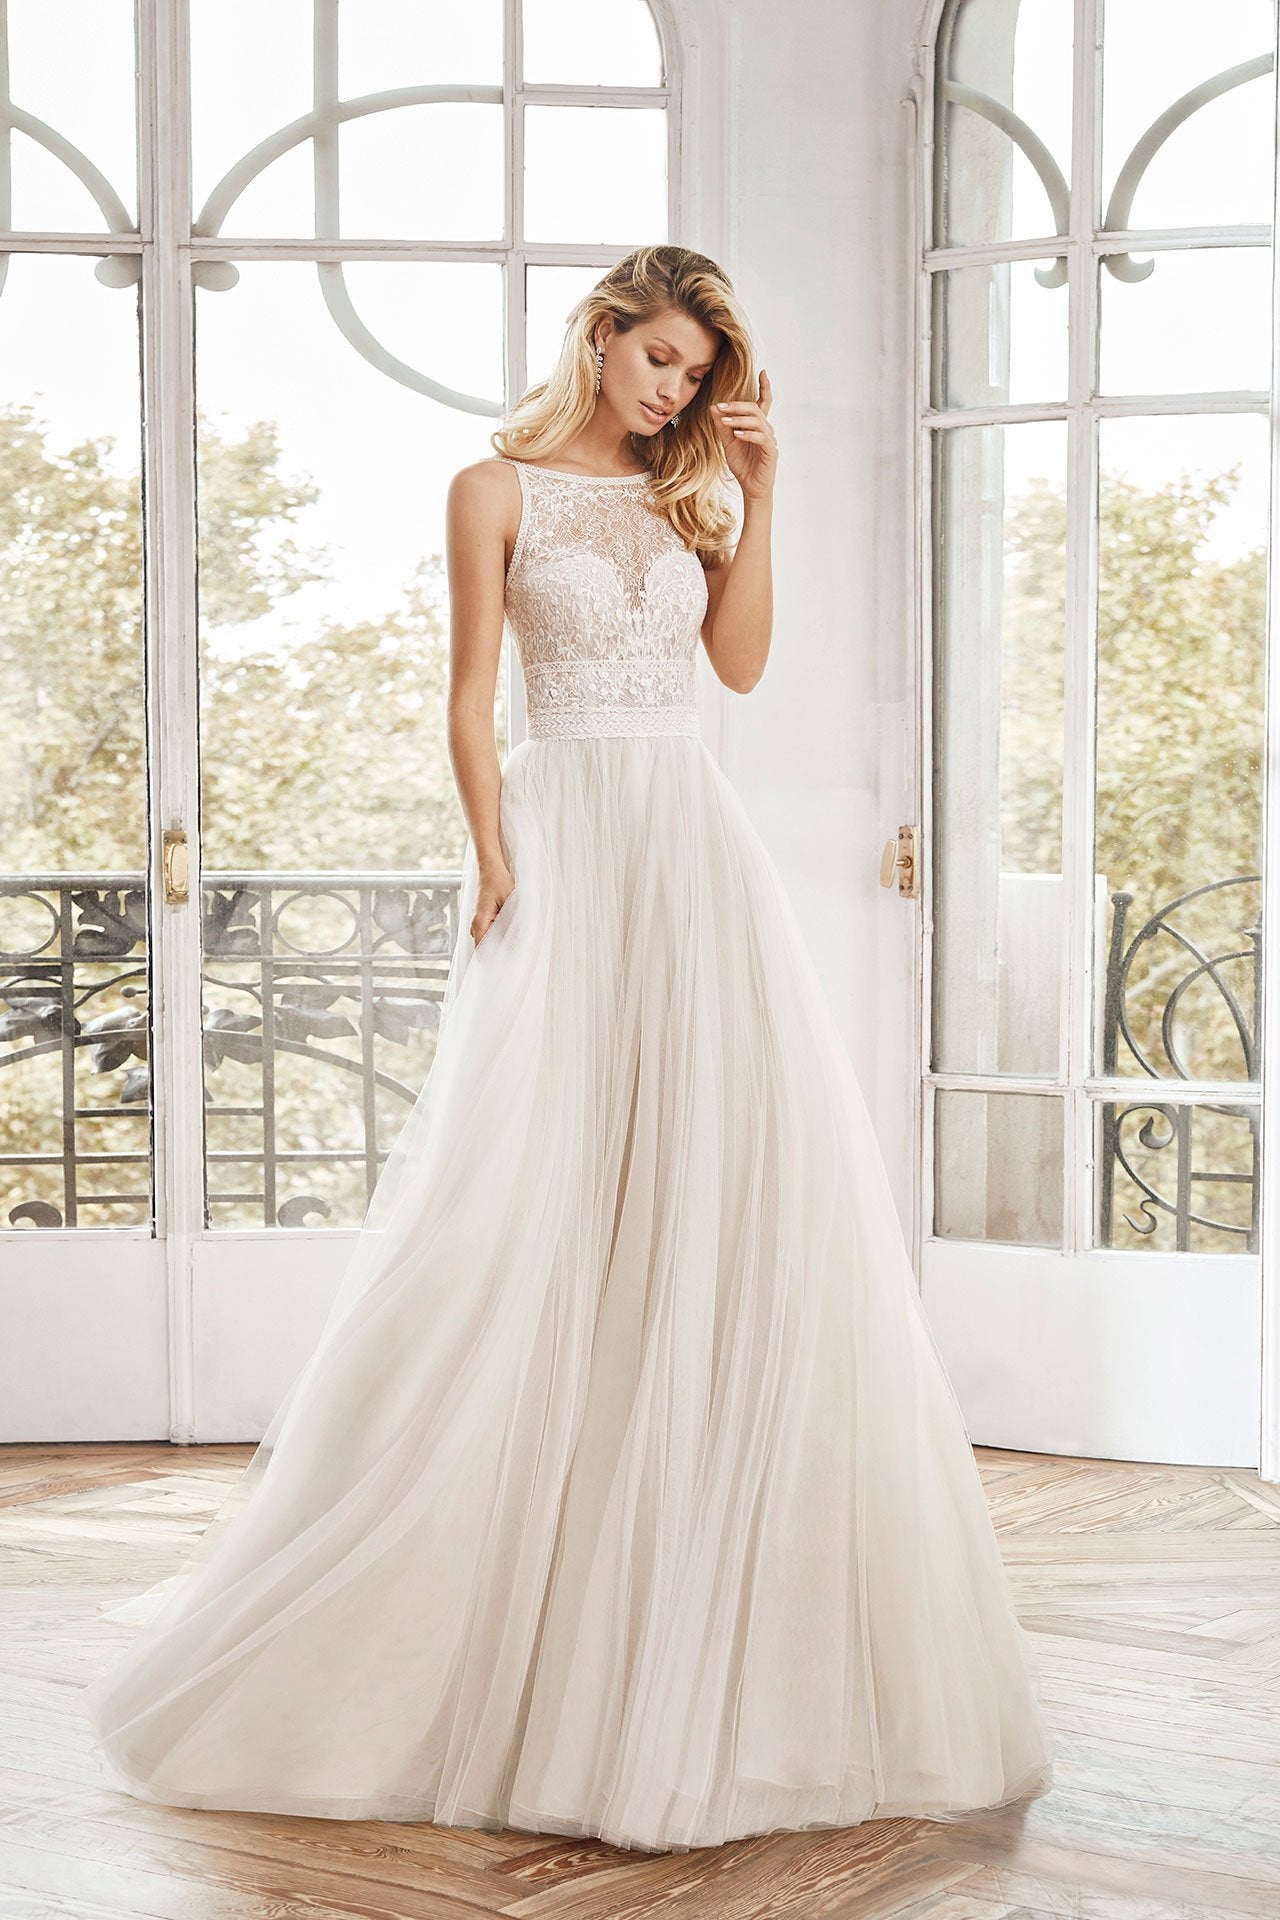 Nore - Sample Gown, Online Sample Sale, Aire Barcelona - Sample Gown - Eternal Bridal